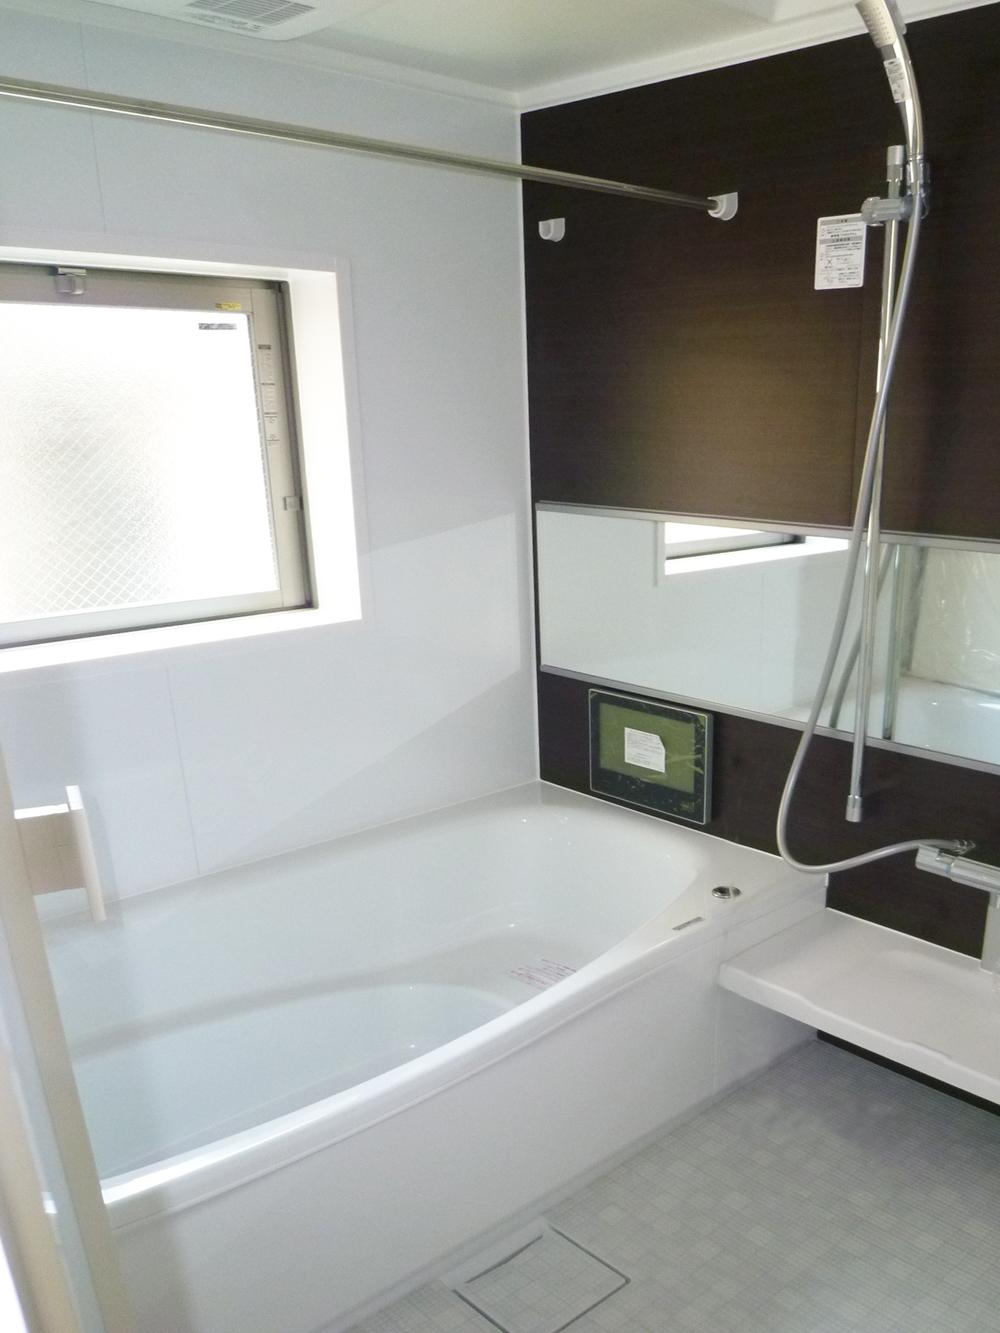 Same specifications photo (bathroom). Indoor TV, It is a bathroom with wide mirror. To prevent moisture and mold in the bathroom drying function (The photograph is the same specification image)